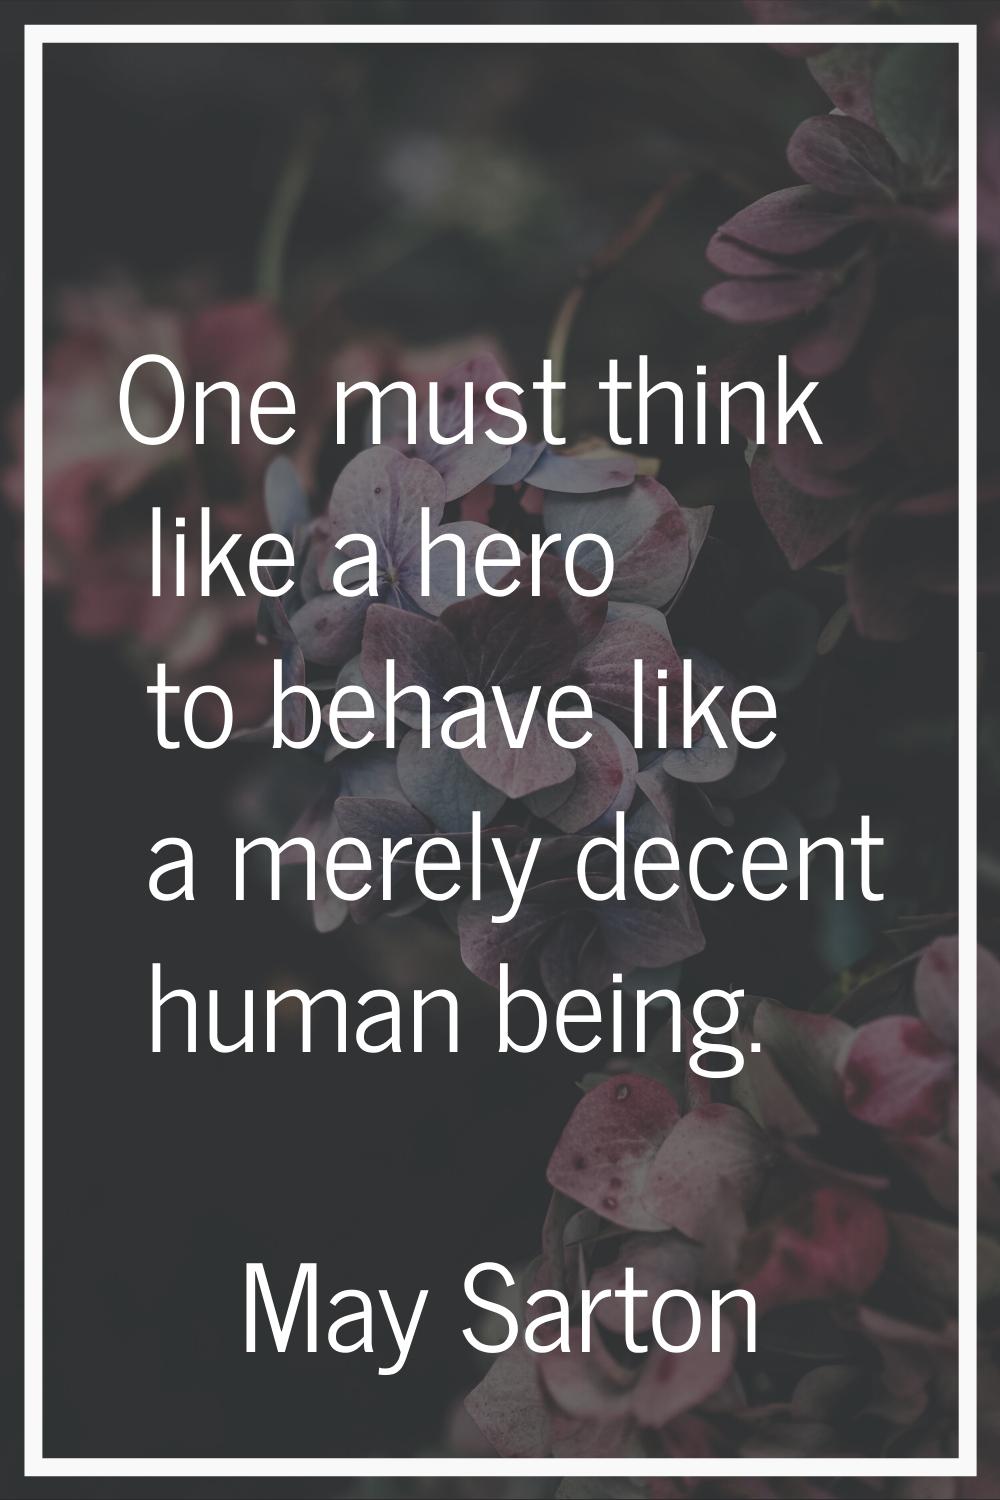 One must think like a hero to behave like a merely decent human being.